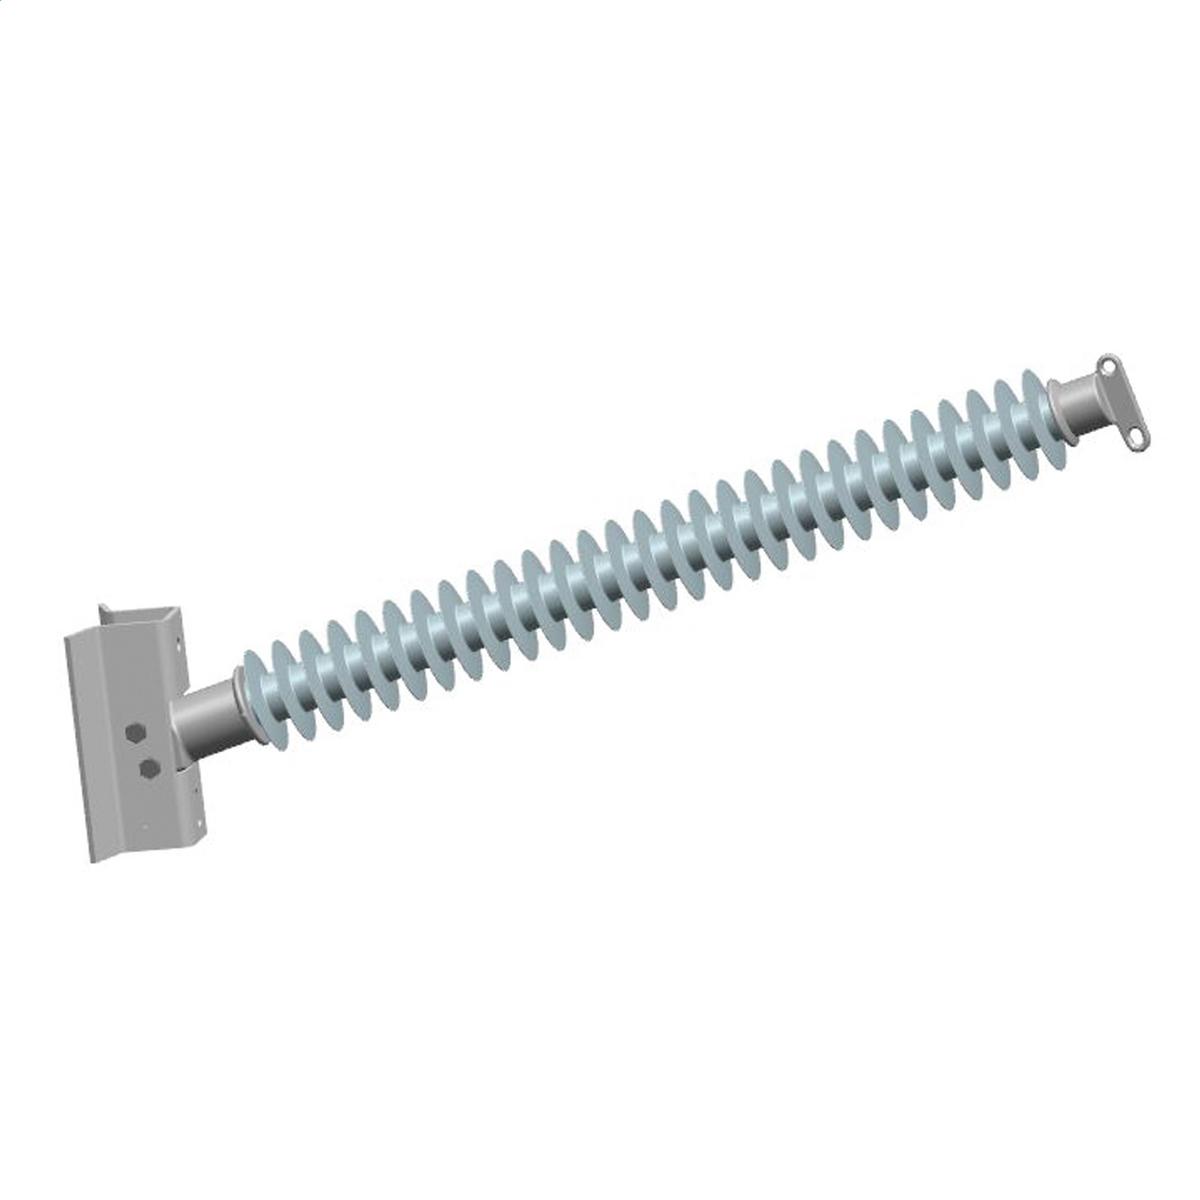 Hubbell P350142S0070 3.5" Line Post, 2 hole blade, Steel gain base 14" CL - 1" bolts  ; Made from hydrophobic silicone polymer ; 